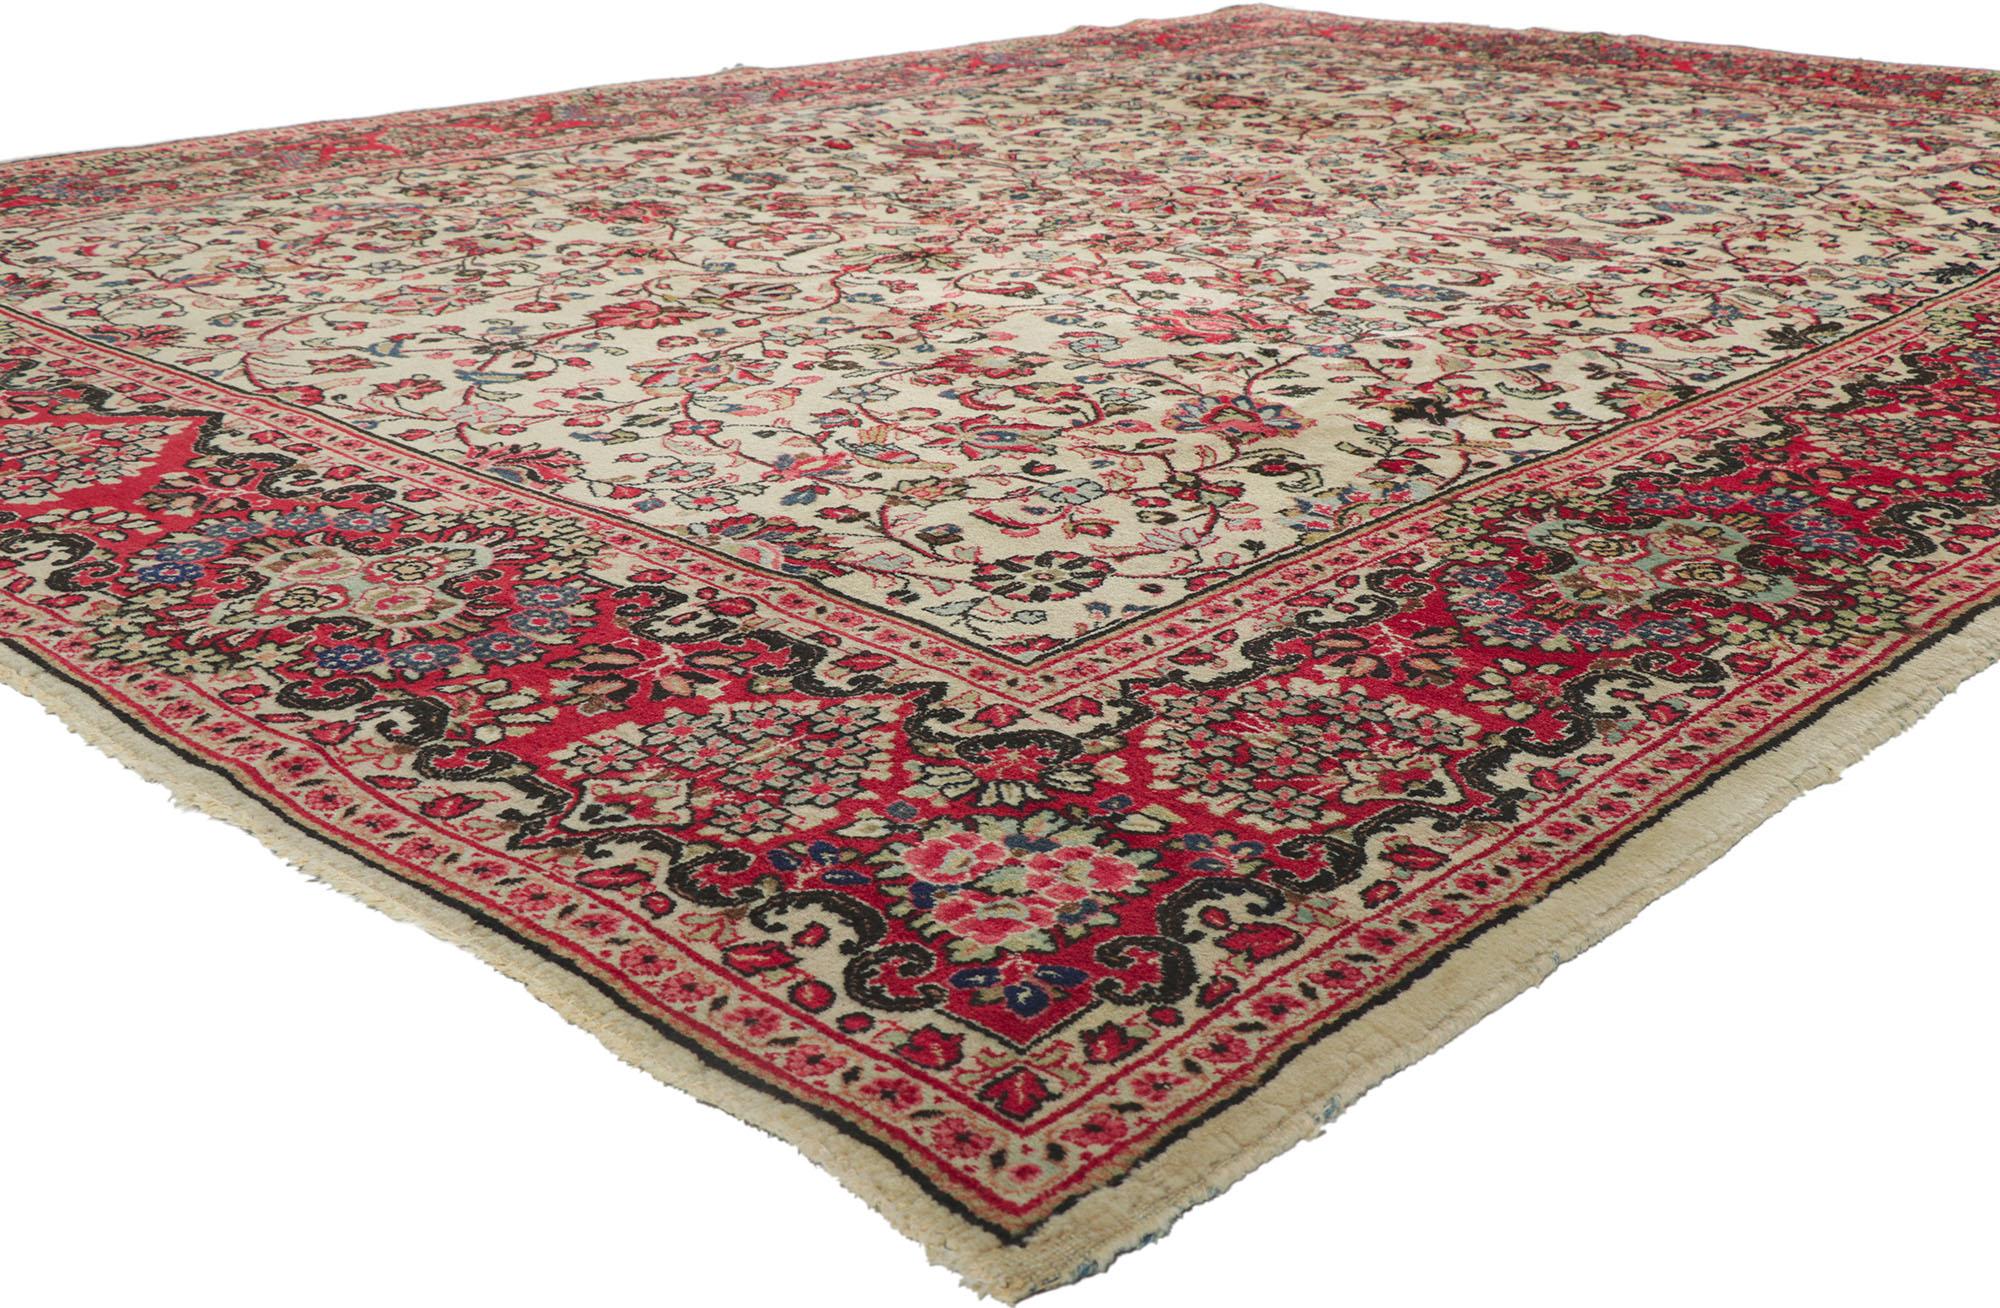 78163 Vintage Persian Sarouk Rug, 09'04 x 12'03.

Step into a harmonious blend of Neoclassic sophistication and Old World allure with this exquisite hand-knotted wool vintage Persian Sarouk rug. Rooted in the weaving traditions of the renowned